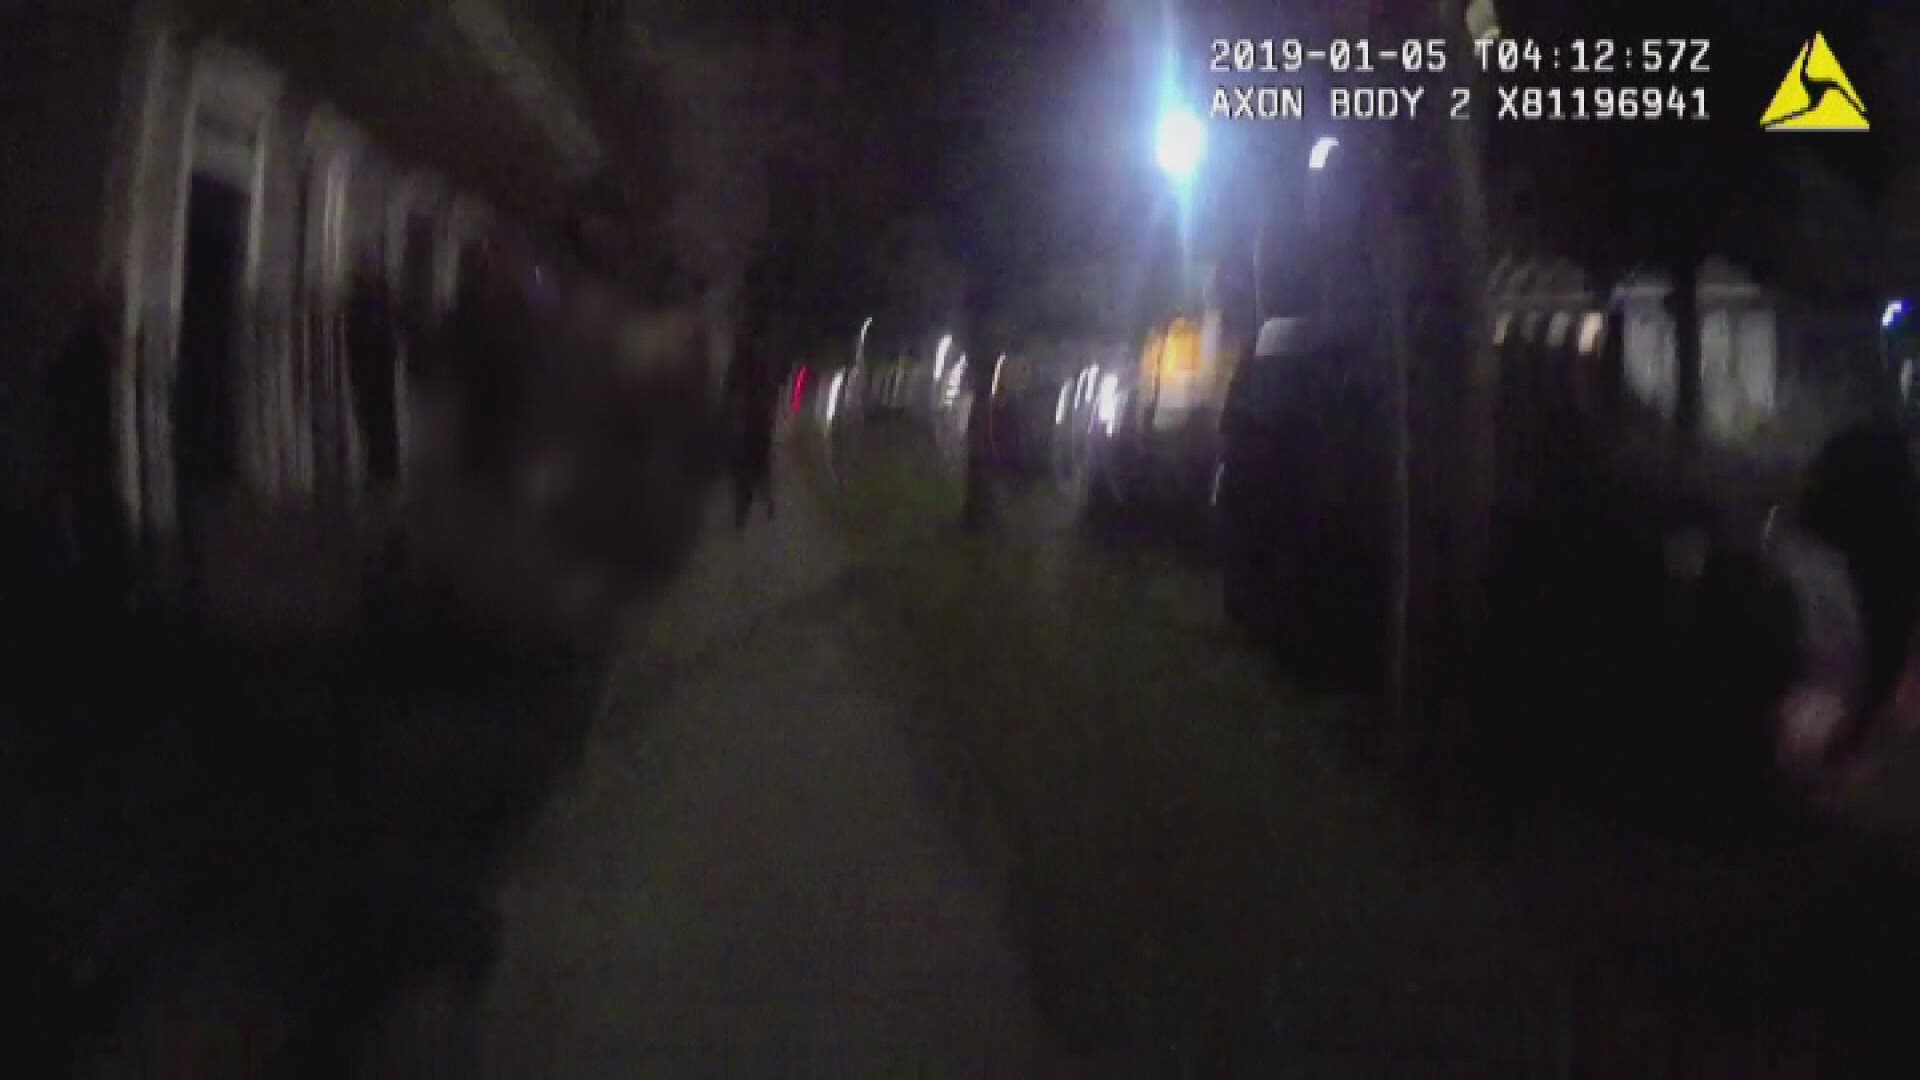 A body cam video, from the perspective of an NOPD officer who was shot while responding to a call, then shows officers firing on the suspect.